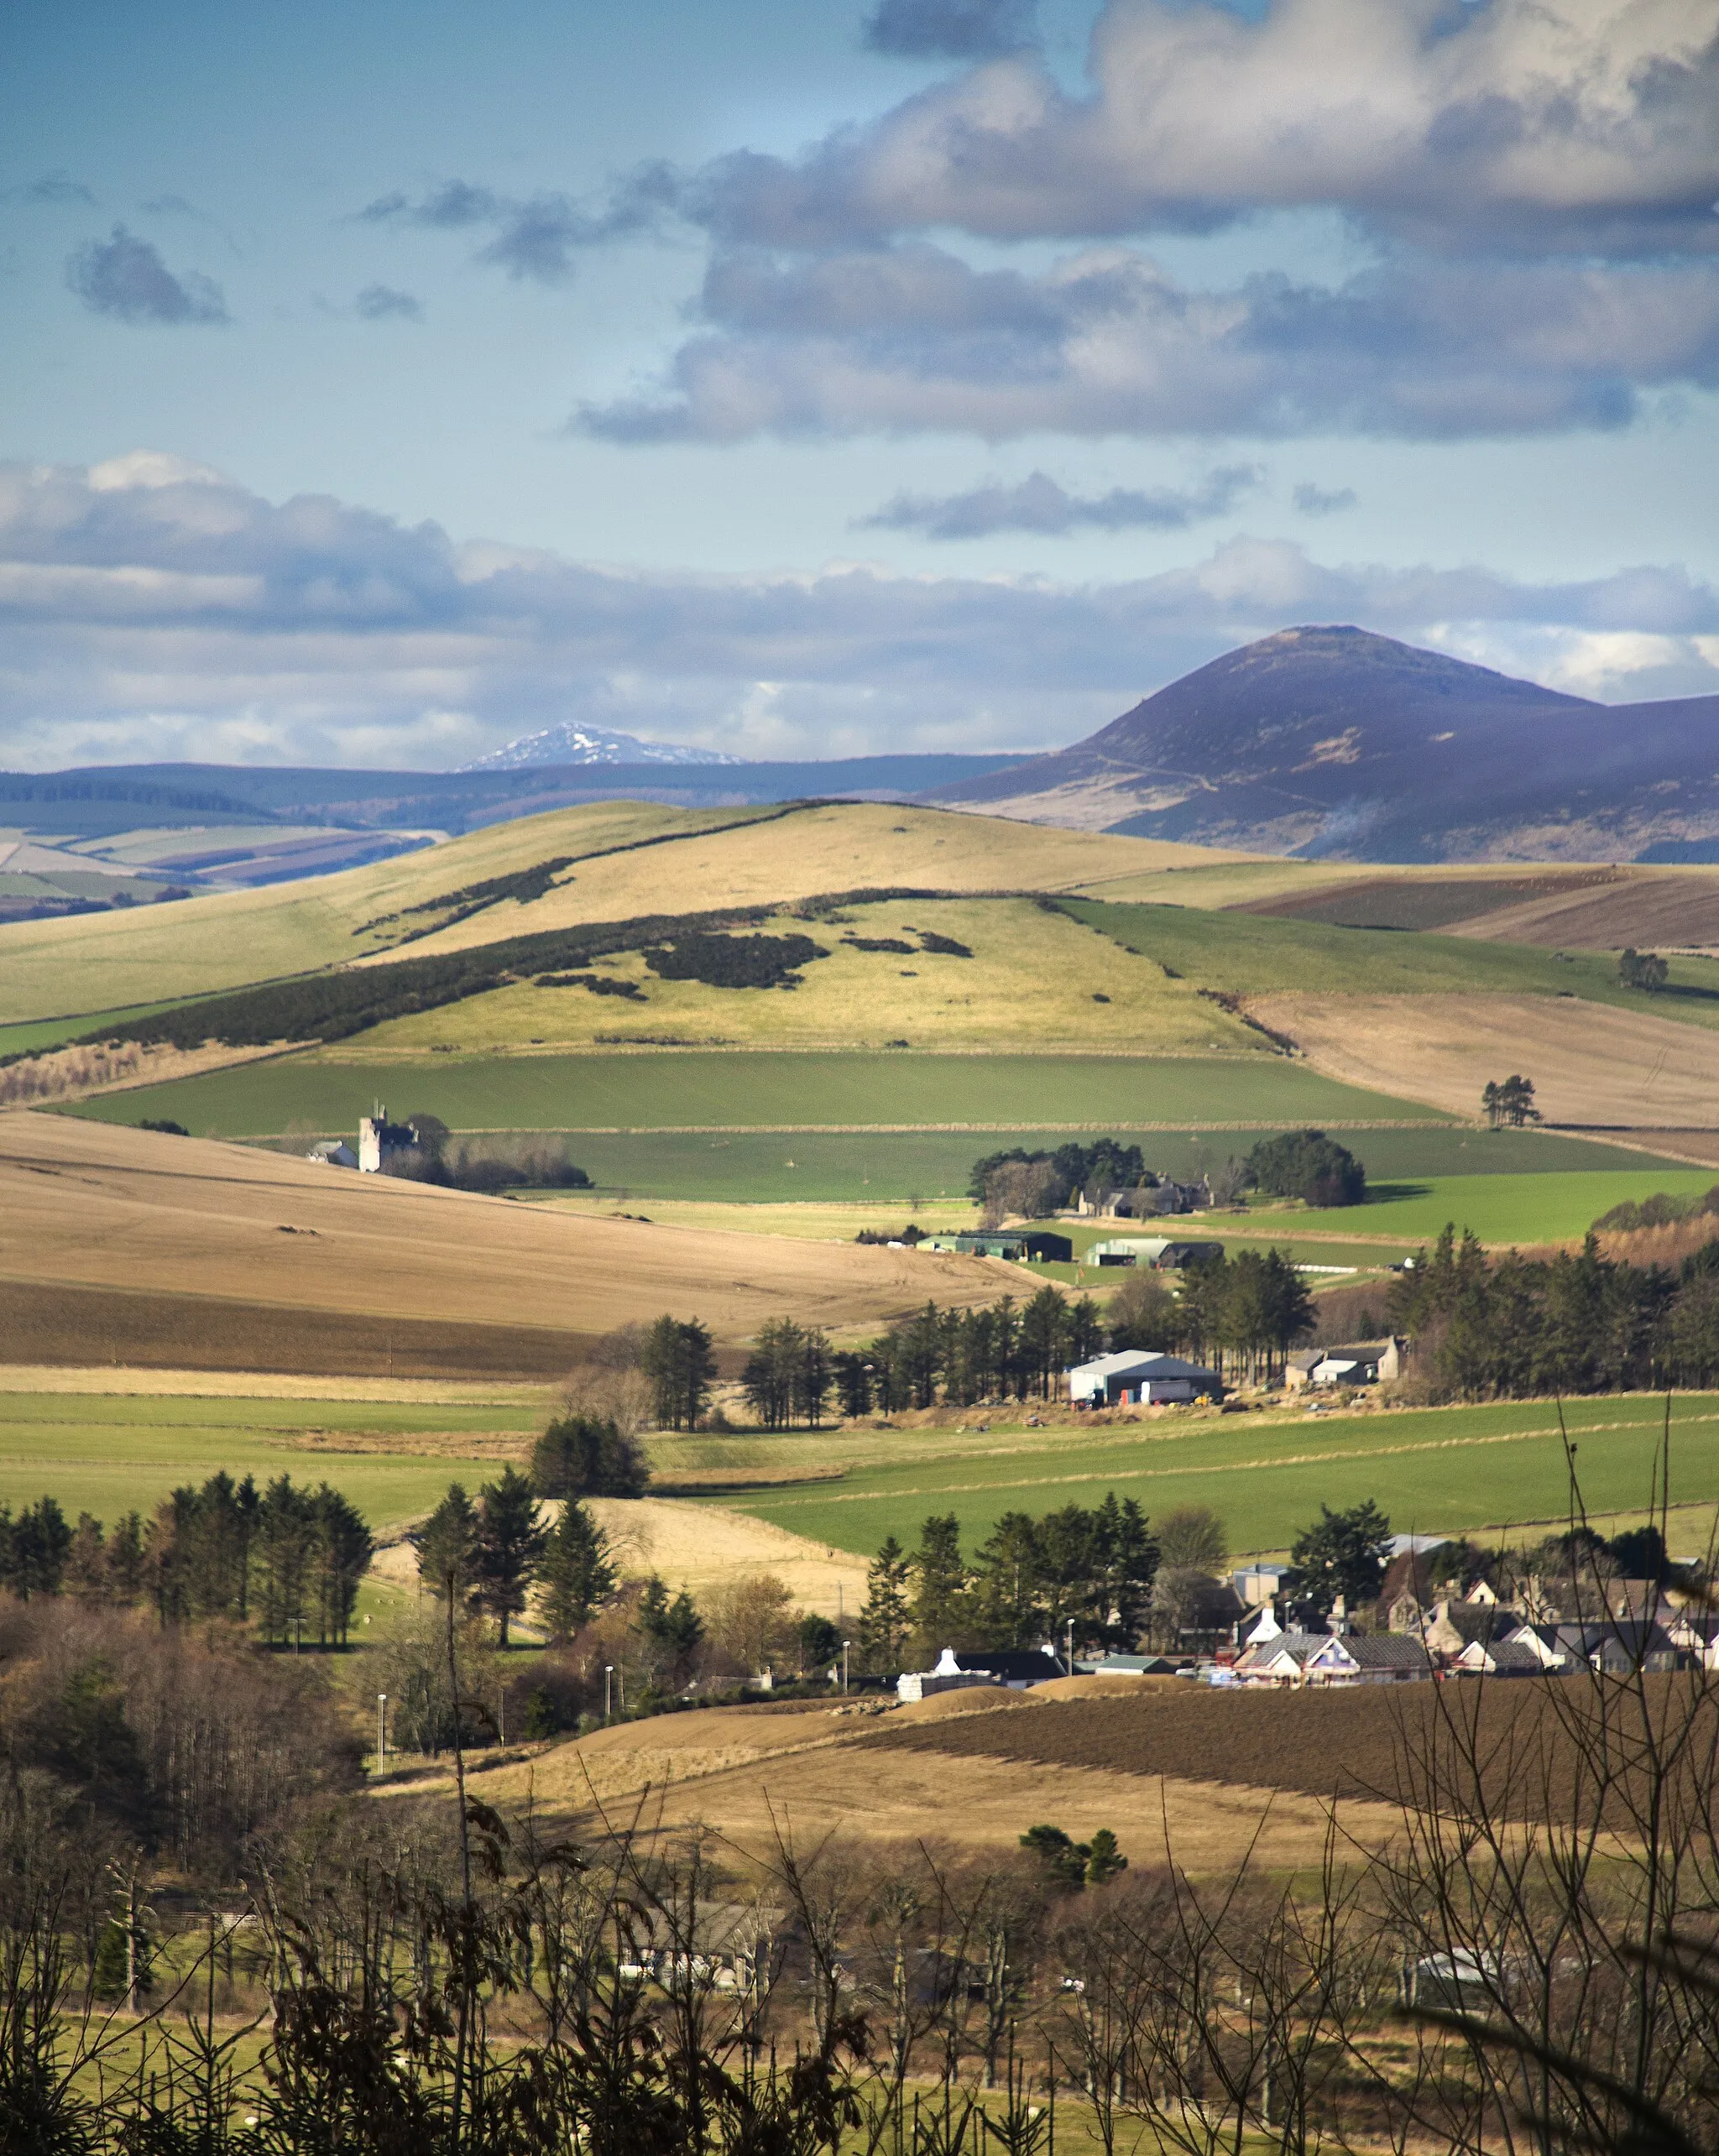 Photo showing: Tap O Noth & Leslie Castle with Ben Rines in the background. Taken from Bennachie woods above the village of Auchleven, Aberdeenshire.